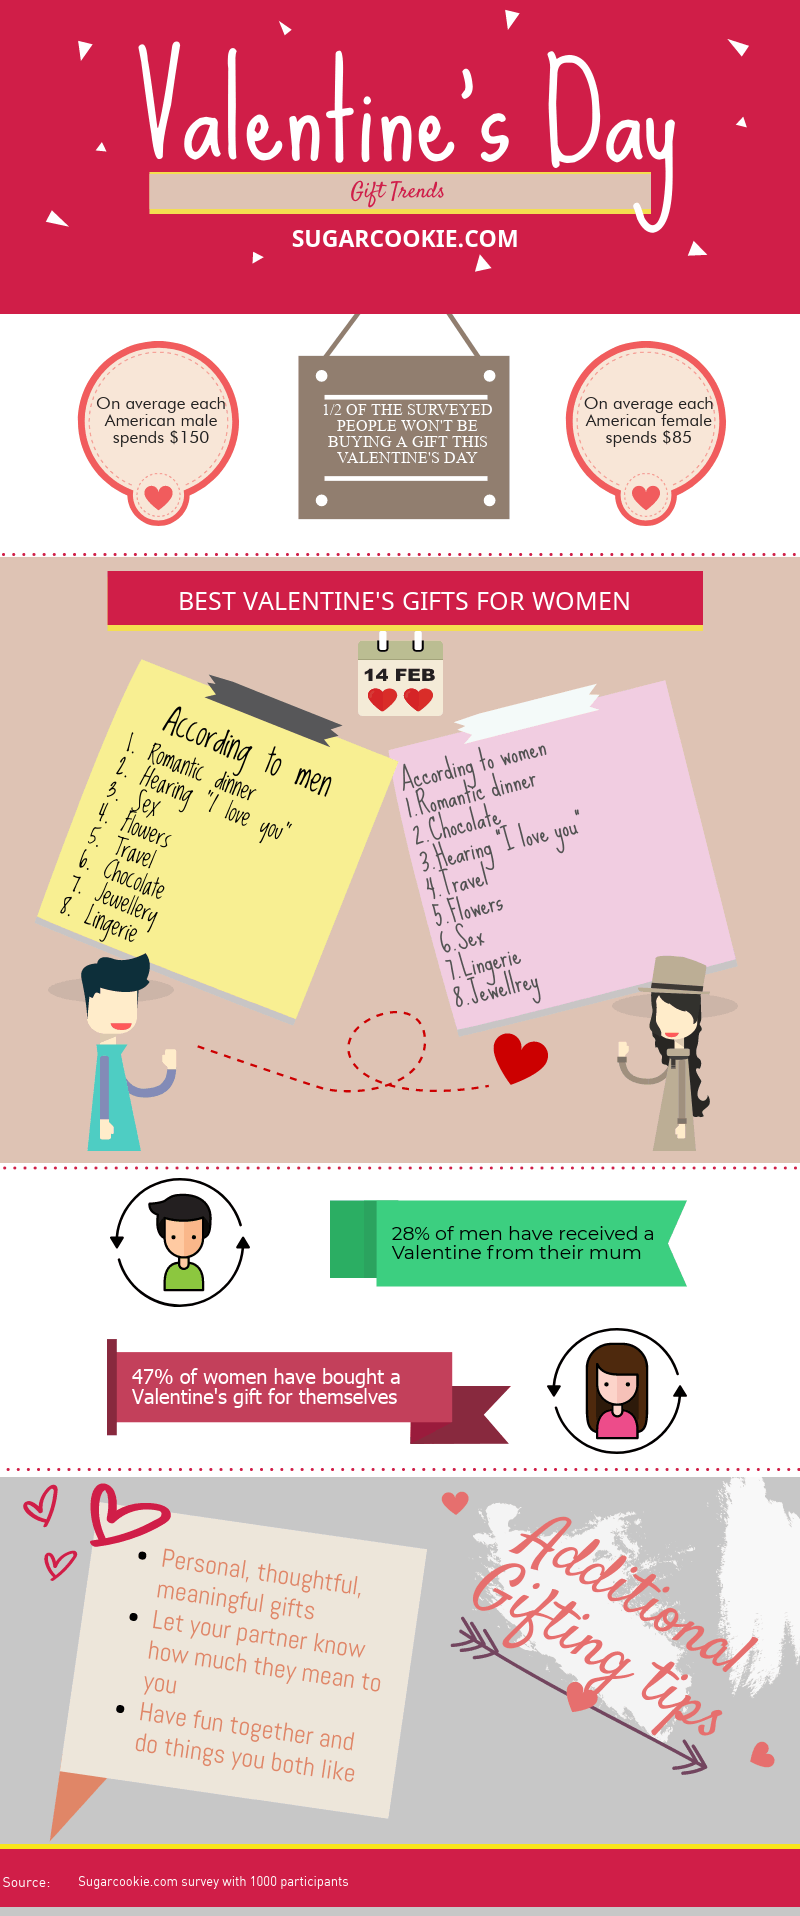 Valentine's Day gifts infographic